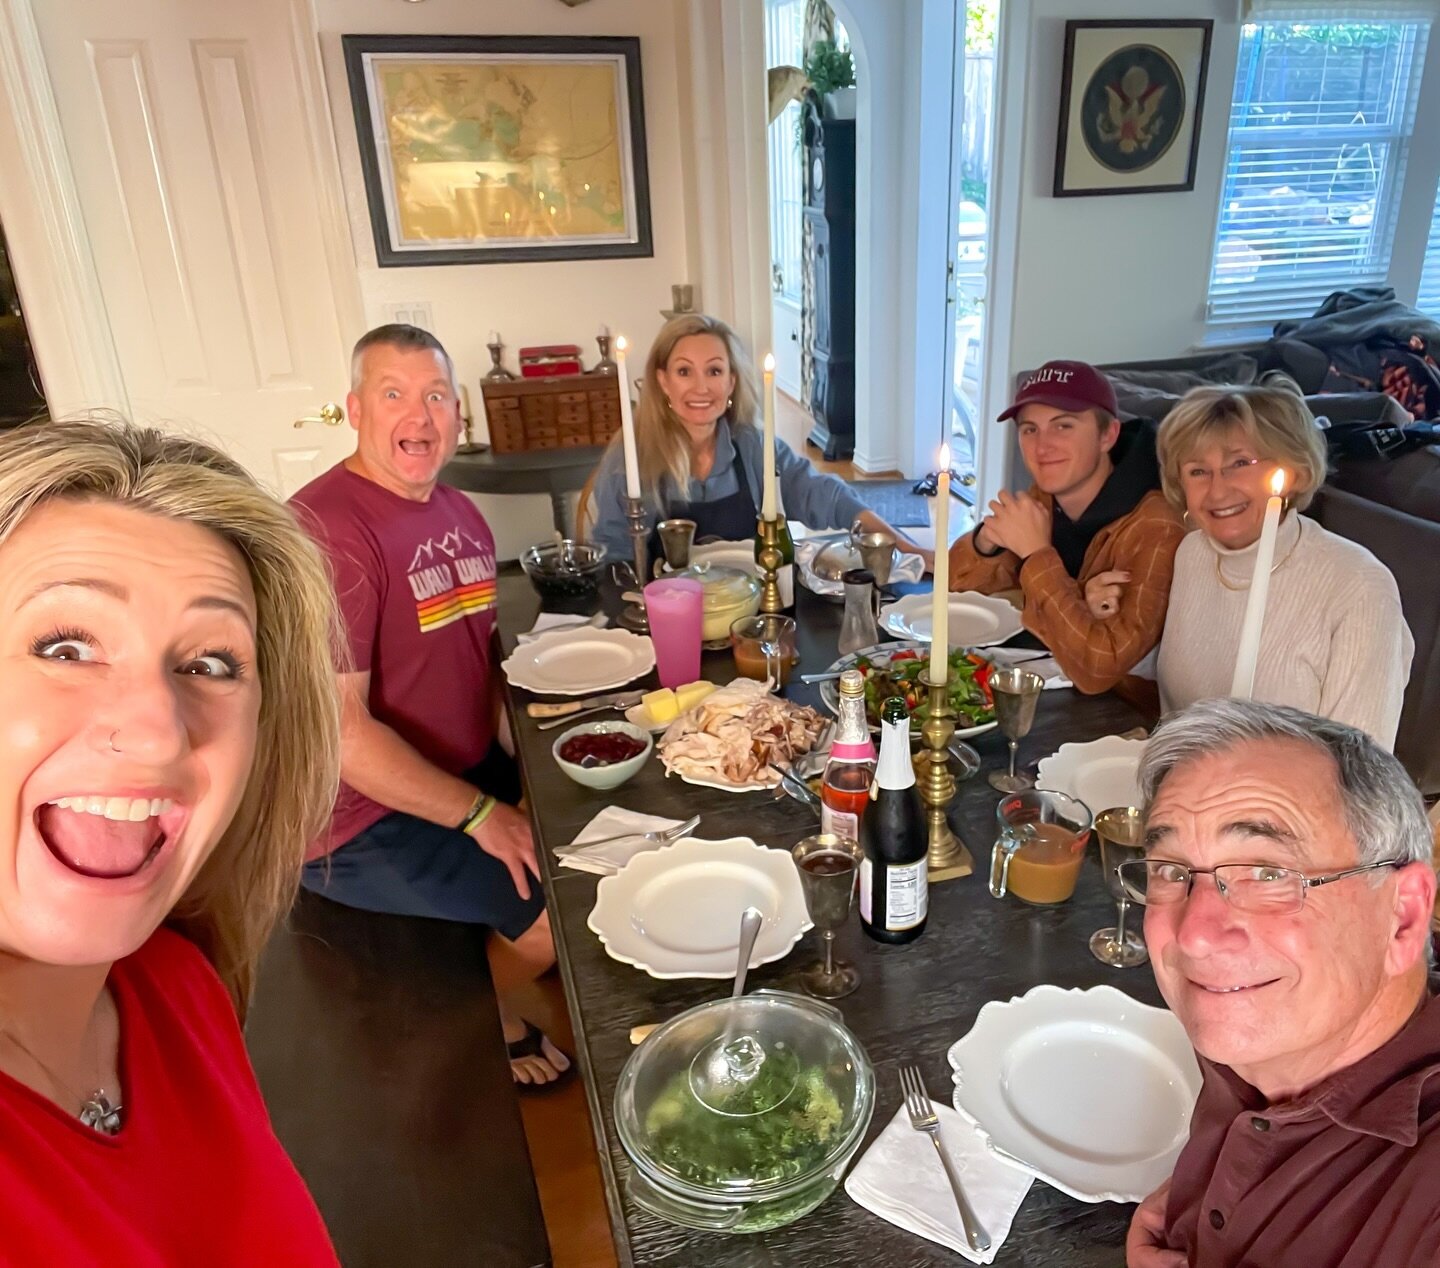 Happy Thanksgiving (yesterday) from our family table to yours. 🦃 Grateful to spend time with my parents, sister &amp; her boys in Santa Barbara. ❤️ Grateful, grateful, grateful.